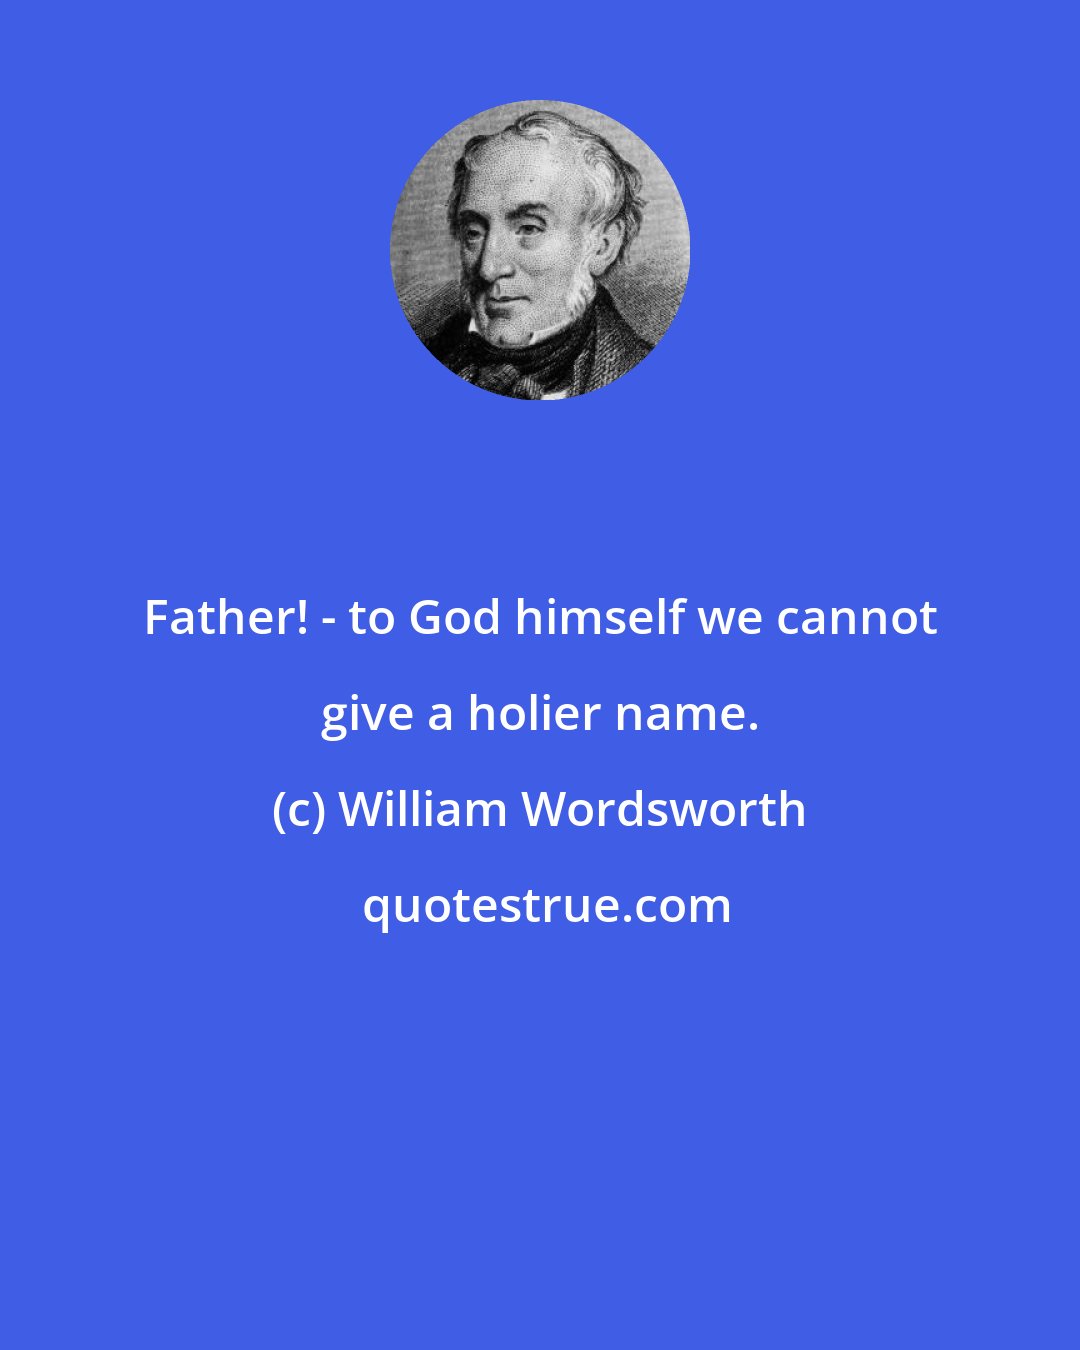 William Wordsworth: Father! - to God himself we cannot give a holier name.